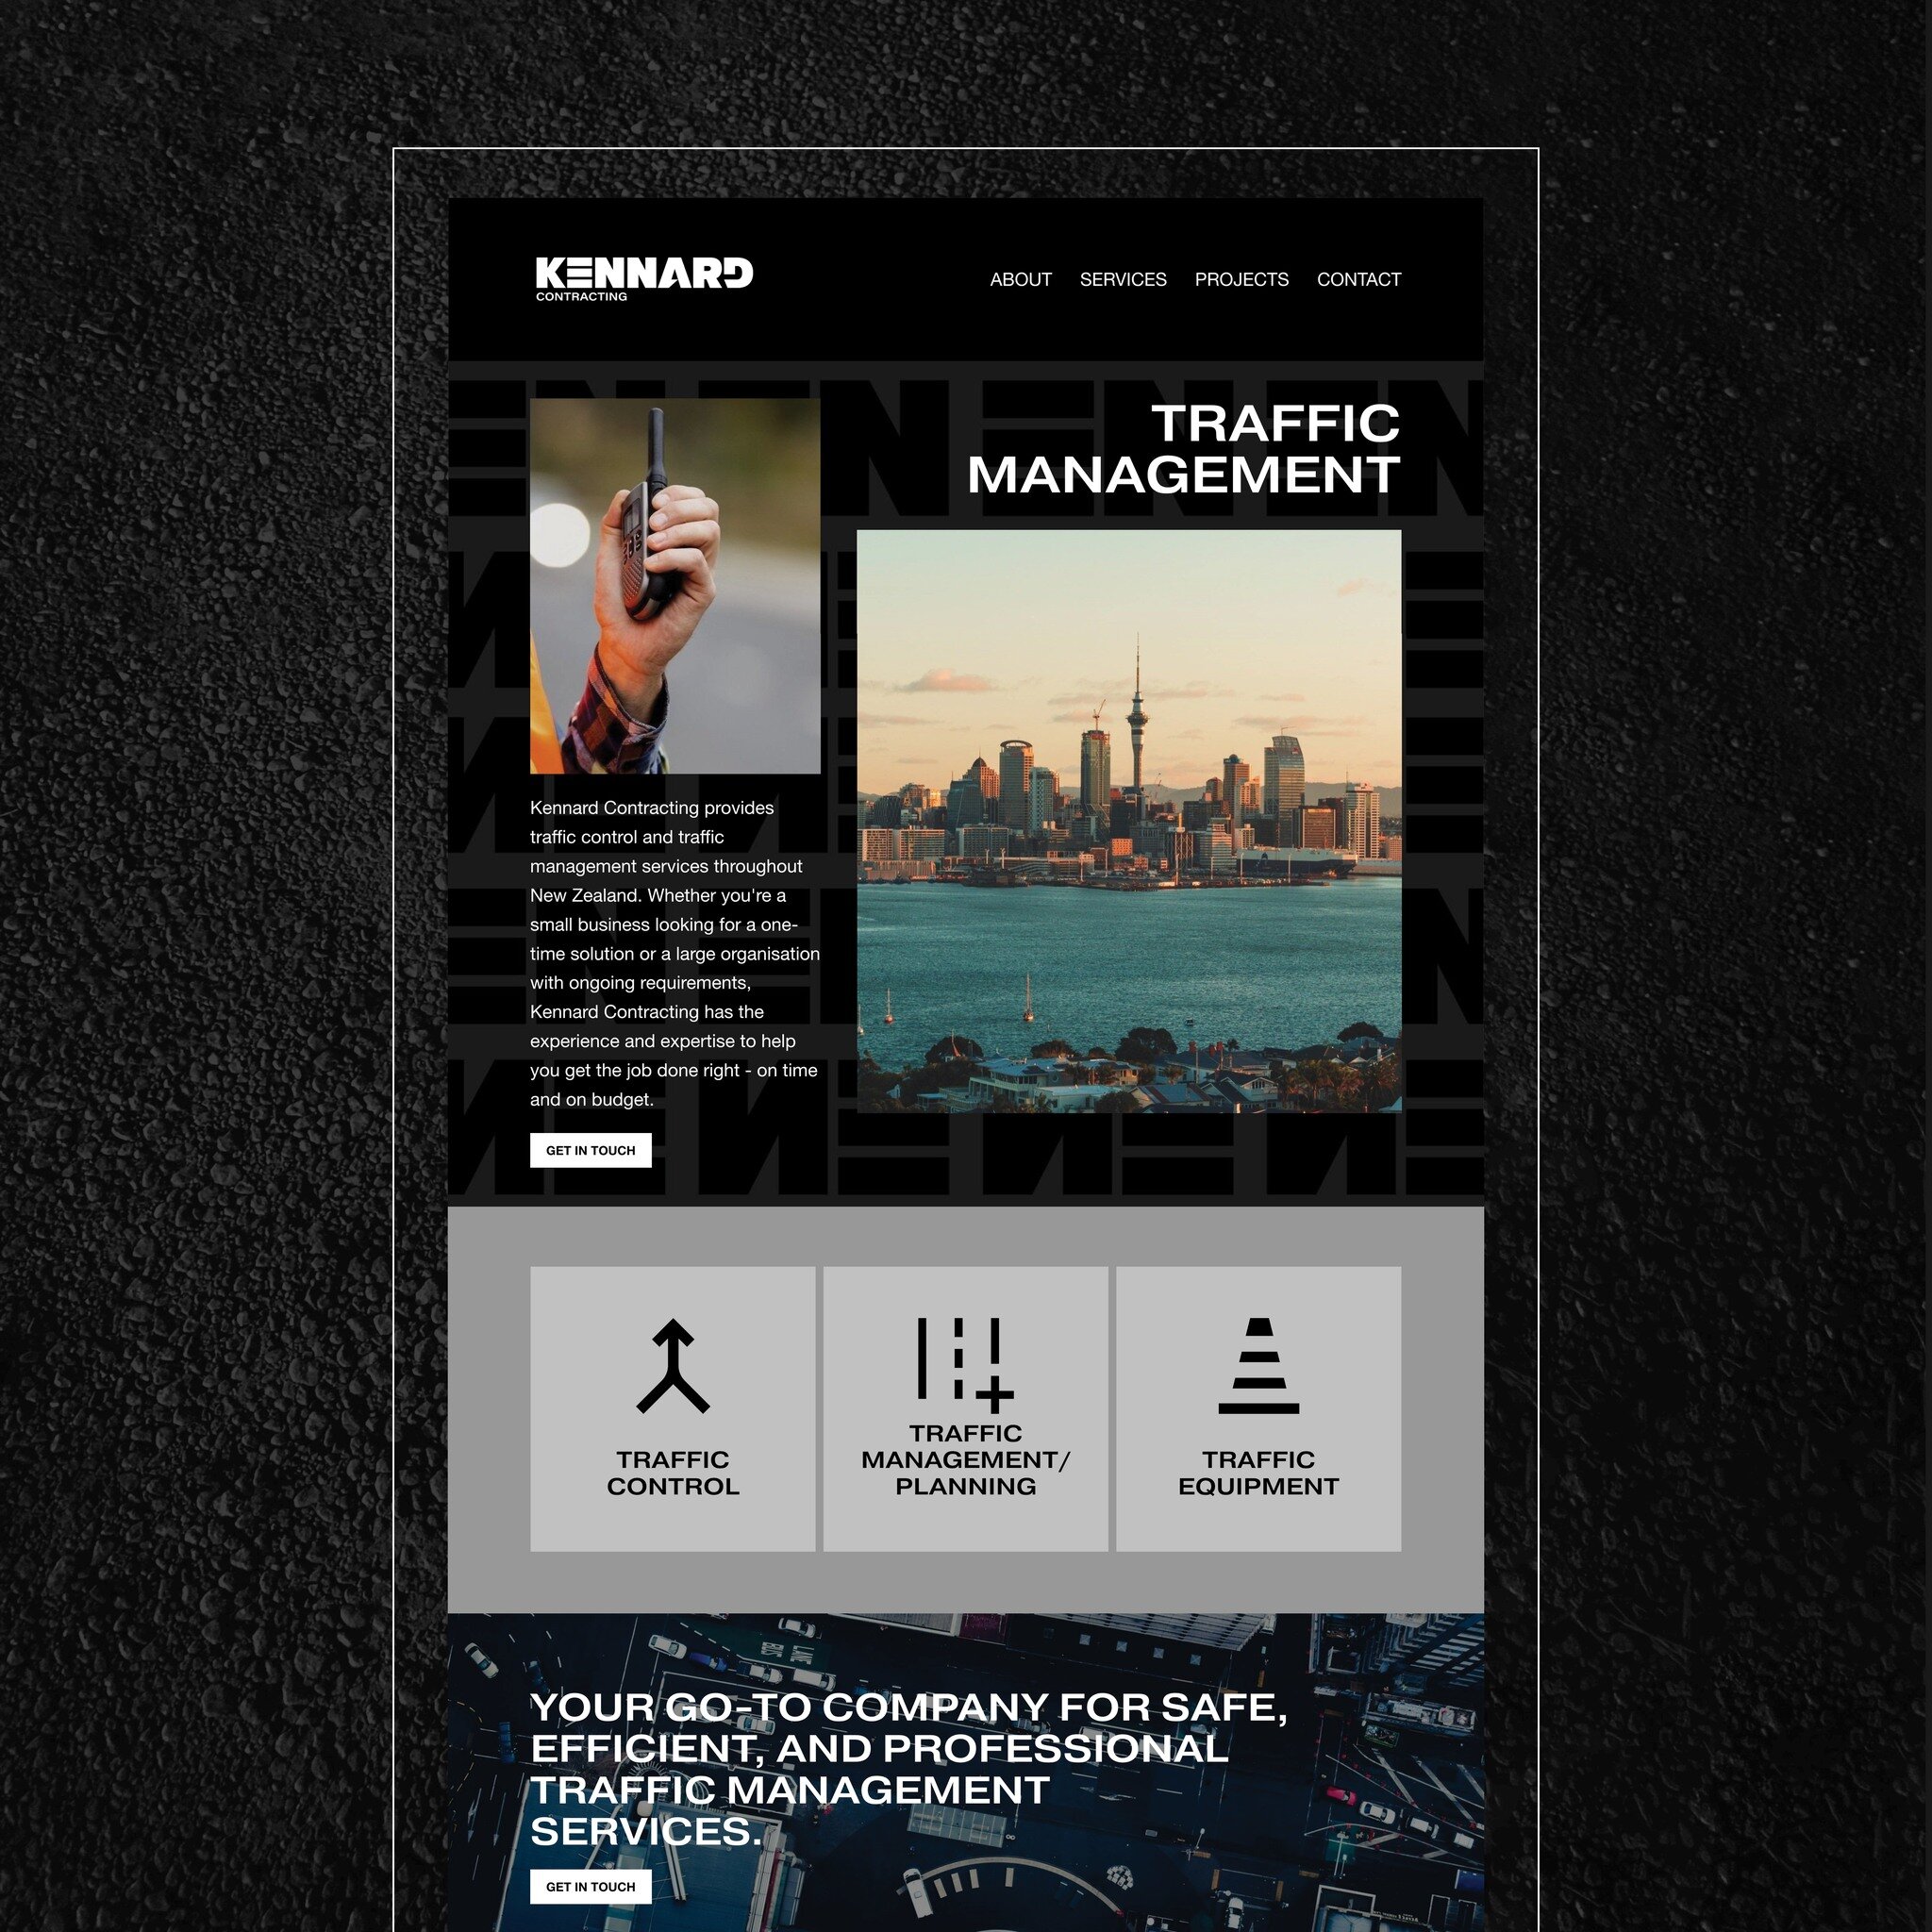 Accelerating online presence with a sleek and dynamic website design for Kennard Contracting's Traffic Management Services.